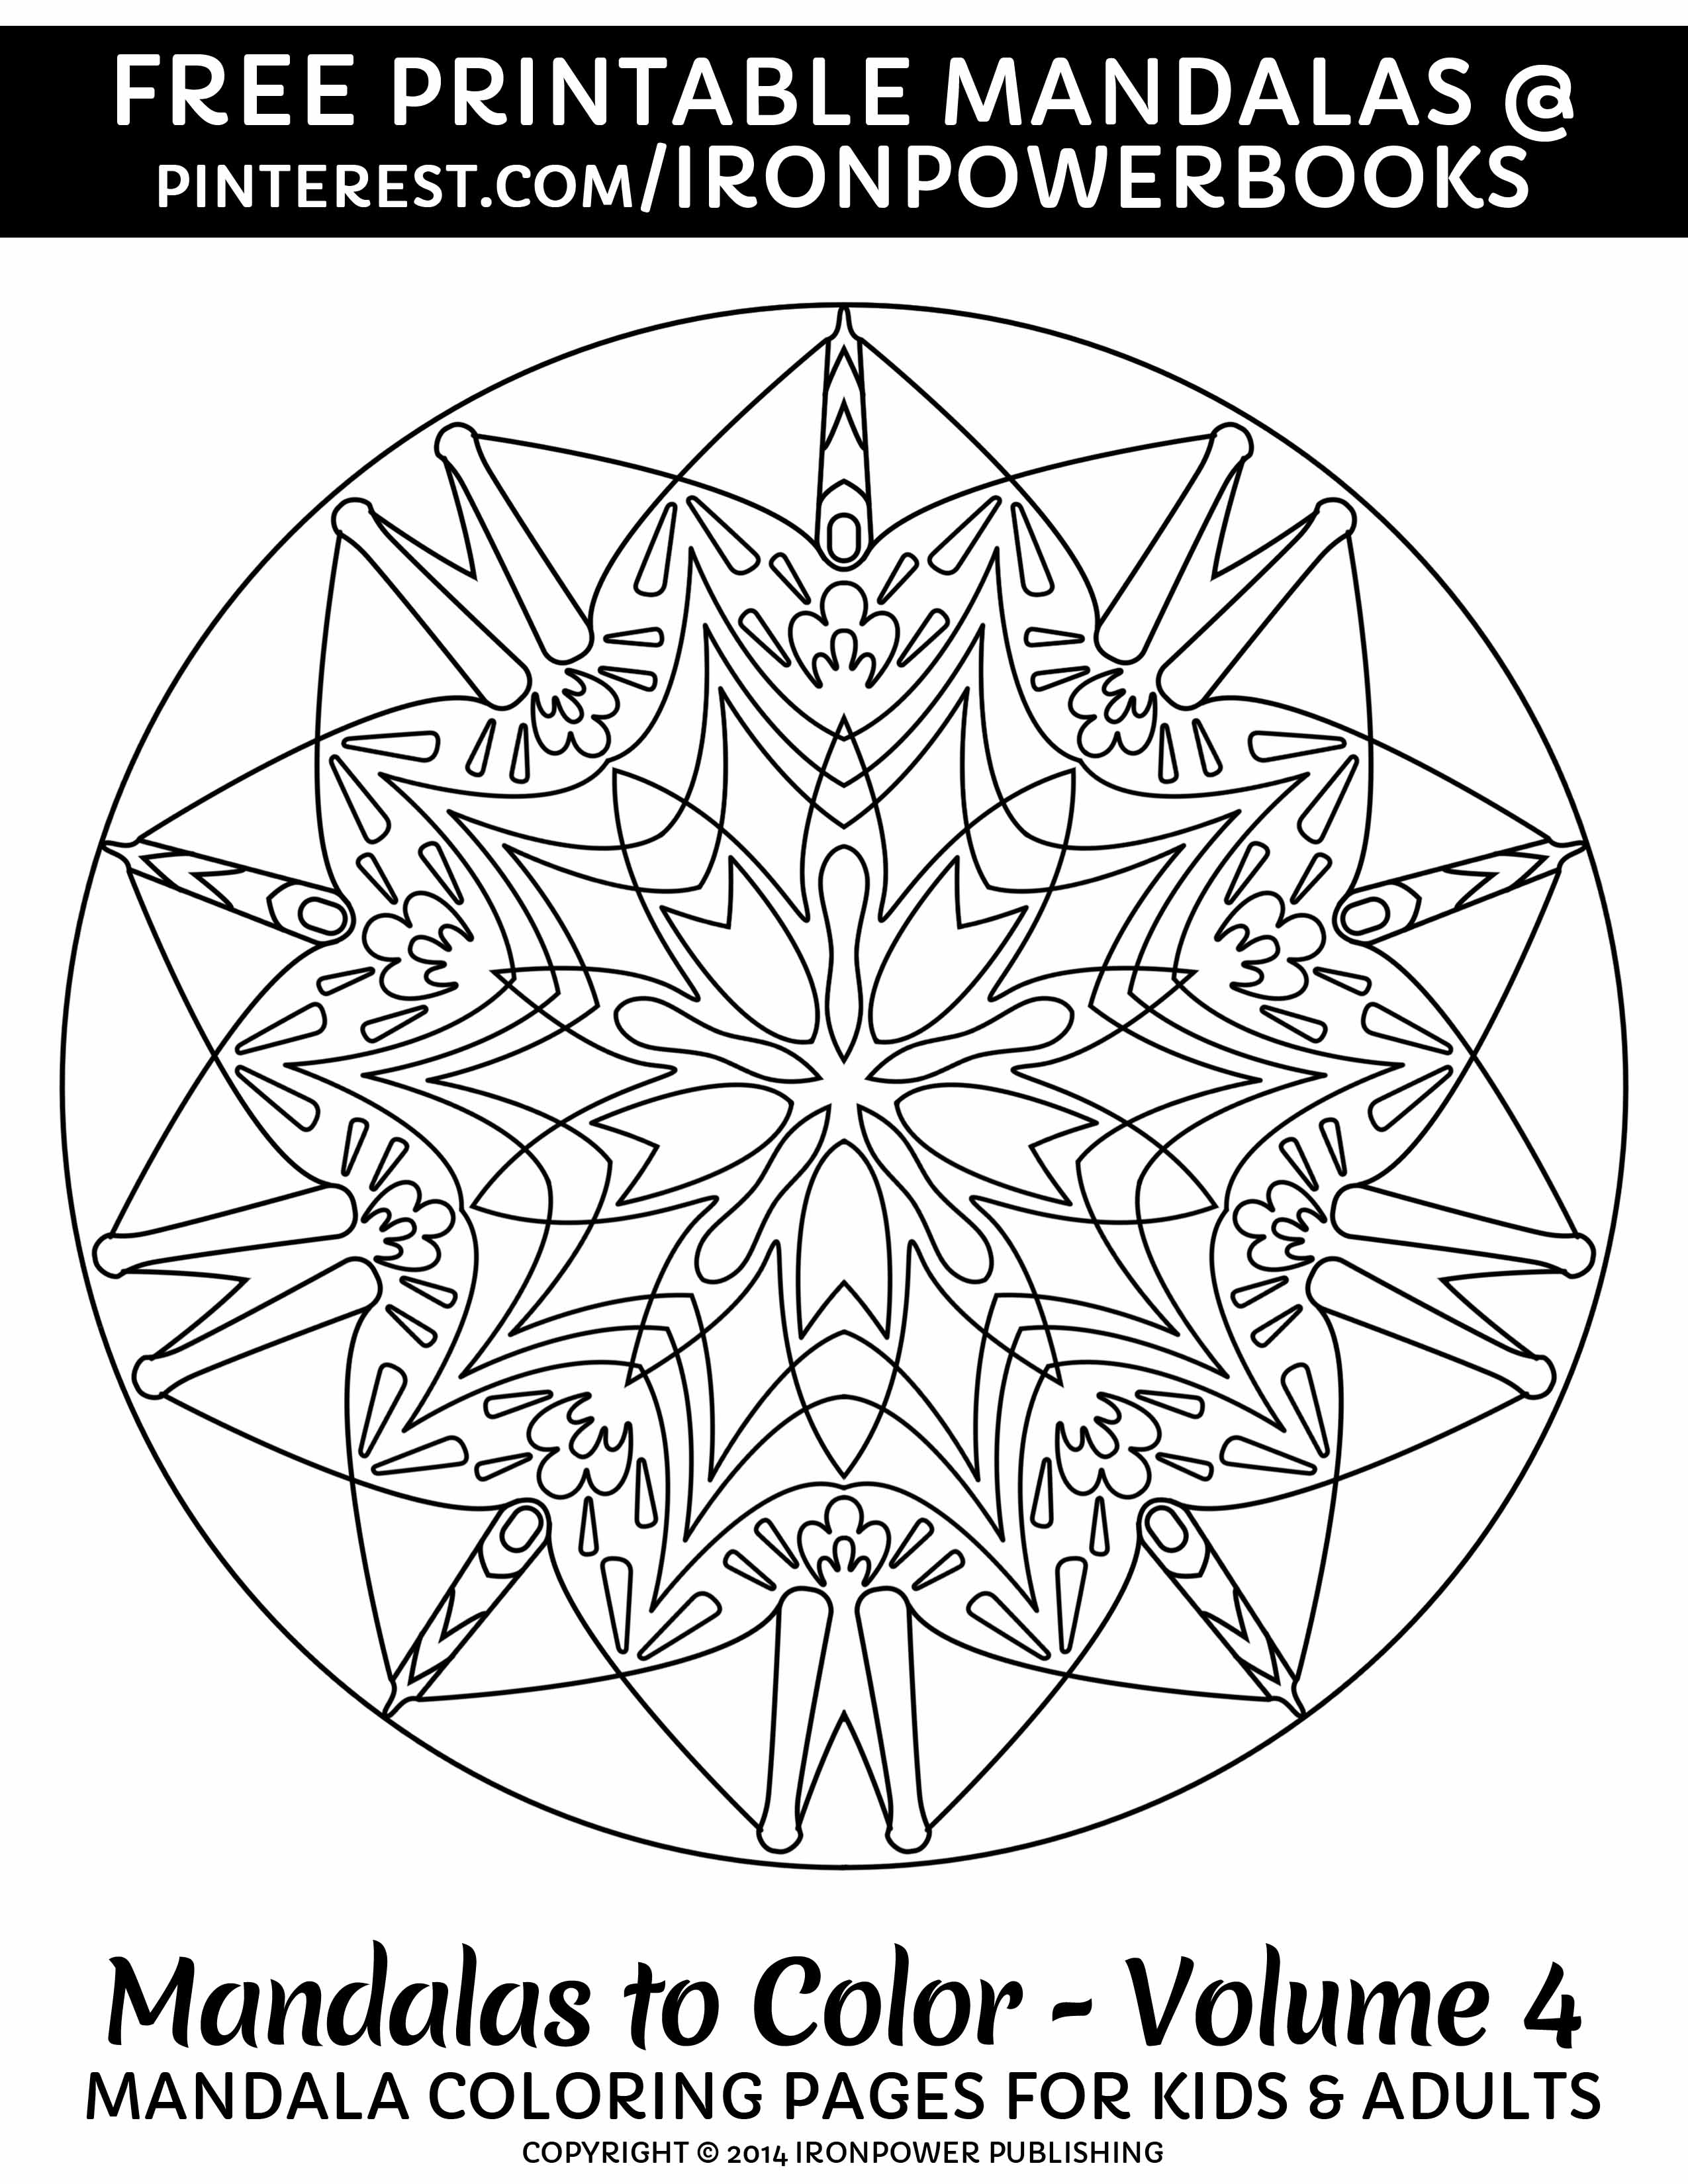 Free Printable Mandala Coloring Pages Adults Coloring Ideas Coloring Ideas Free Printable Mandala Pages For